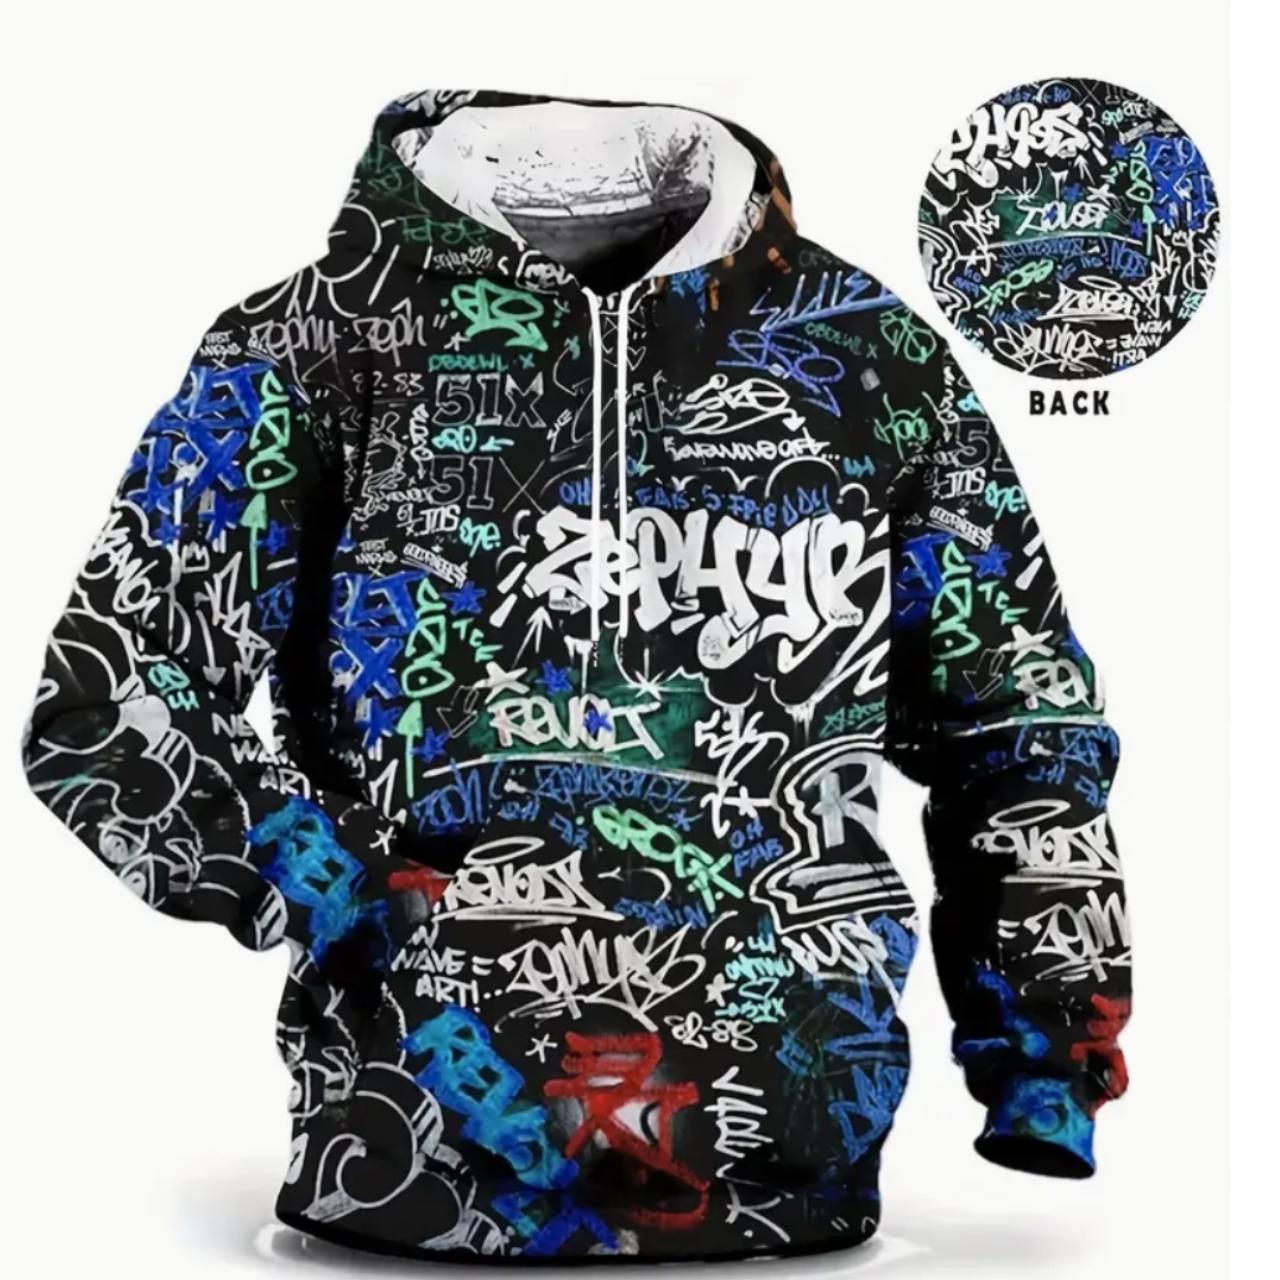 graphic designed hoodie with graffiti writing all over - Depop